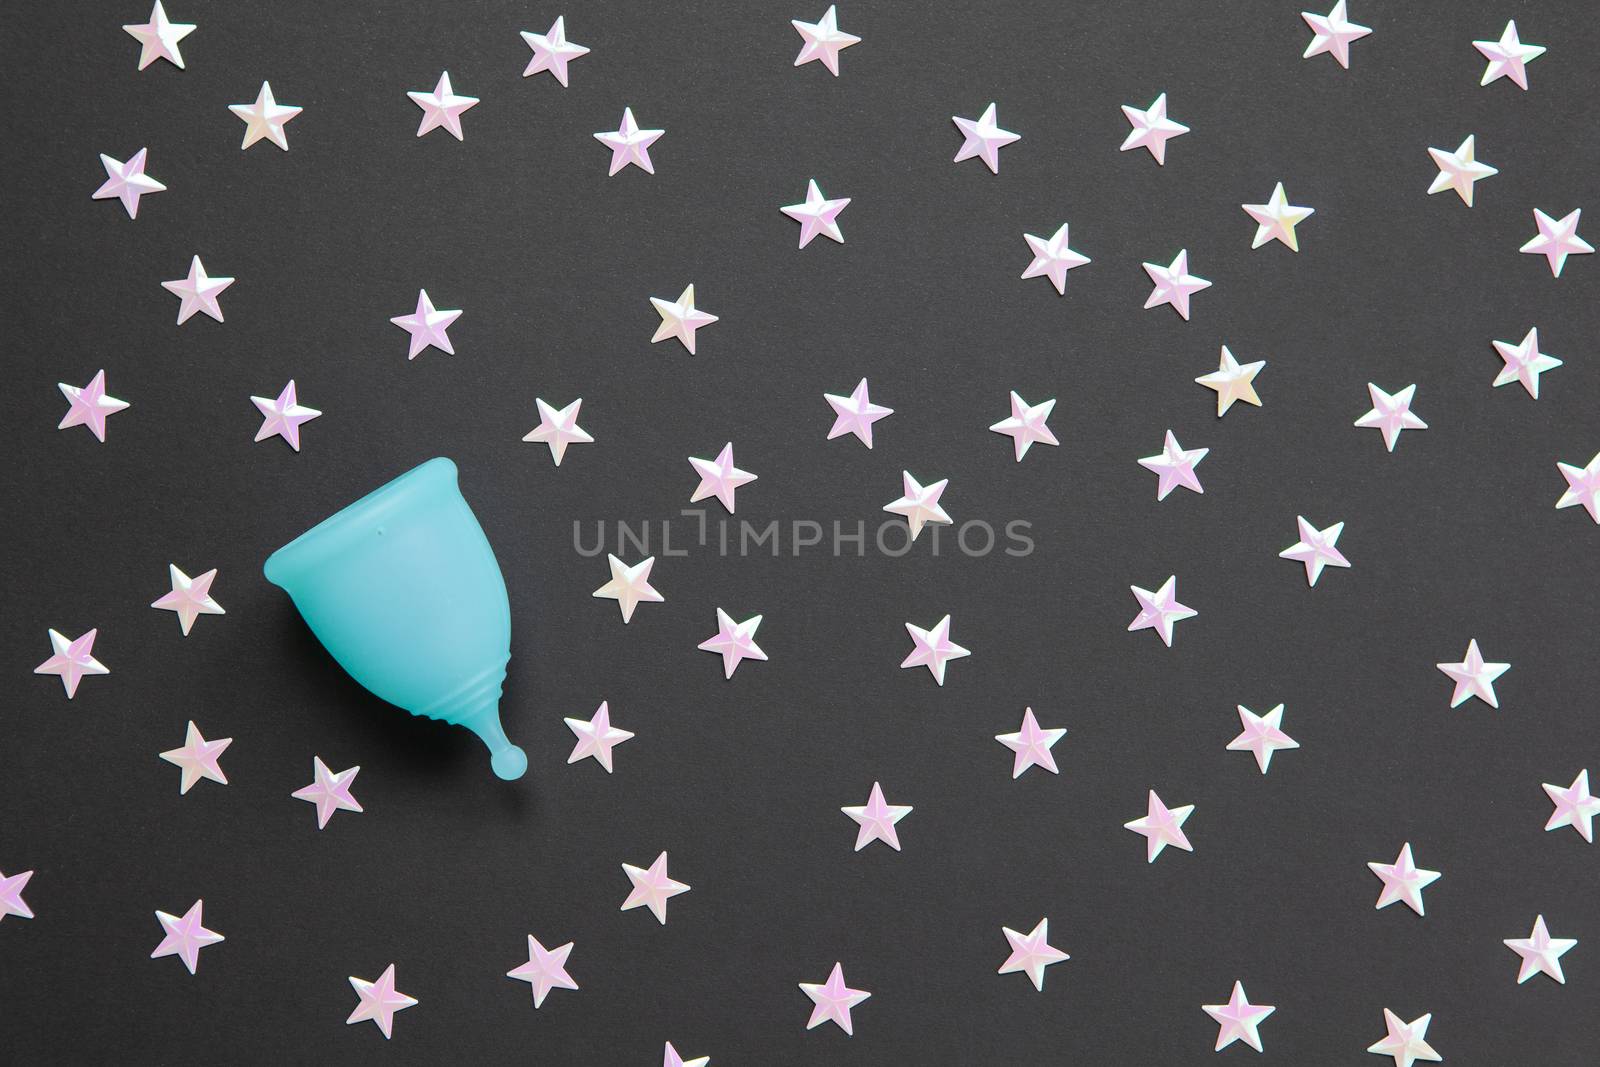 Turquoise menstrual cup on black background with numerous stars. Concept comfort of using cup at night, zero waste, savings, minimalism. Feminine hygiene product, flat lay, copy space. Horizontal.